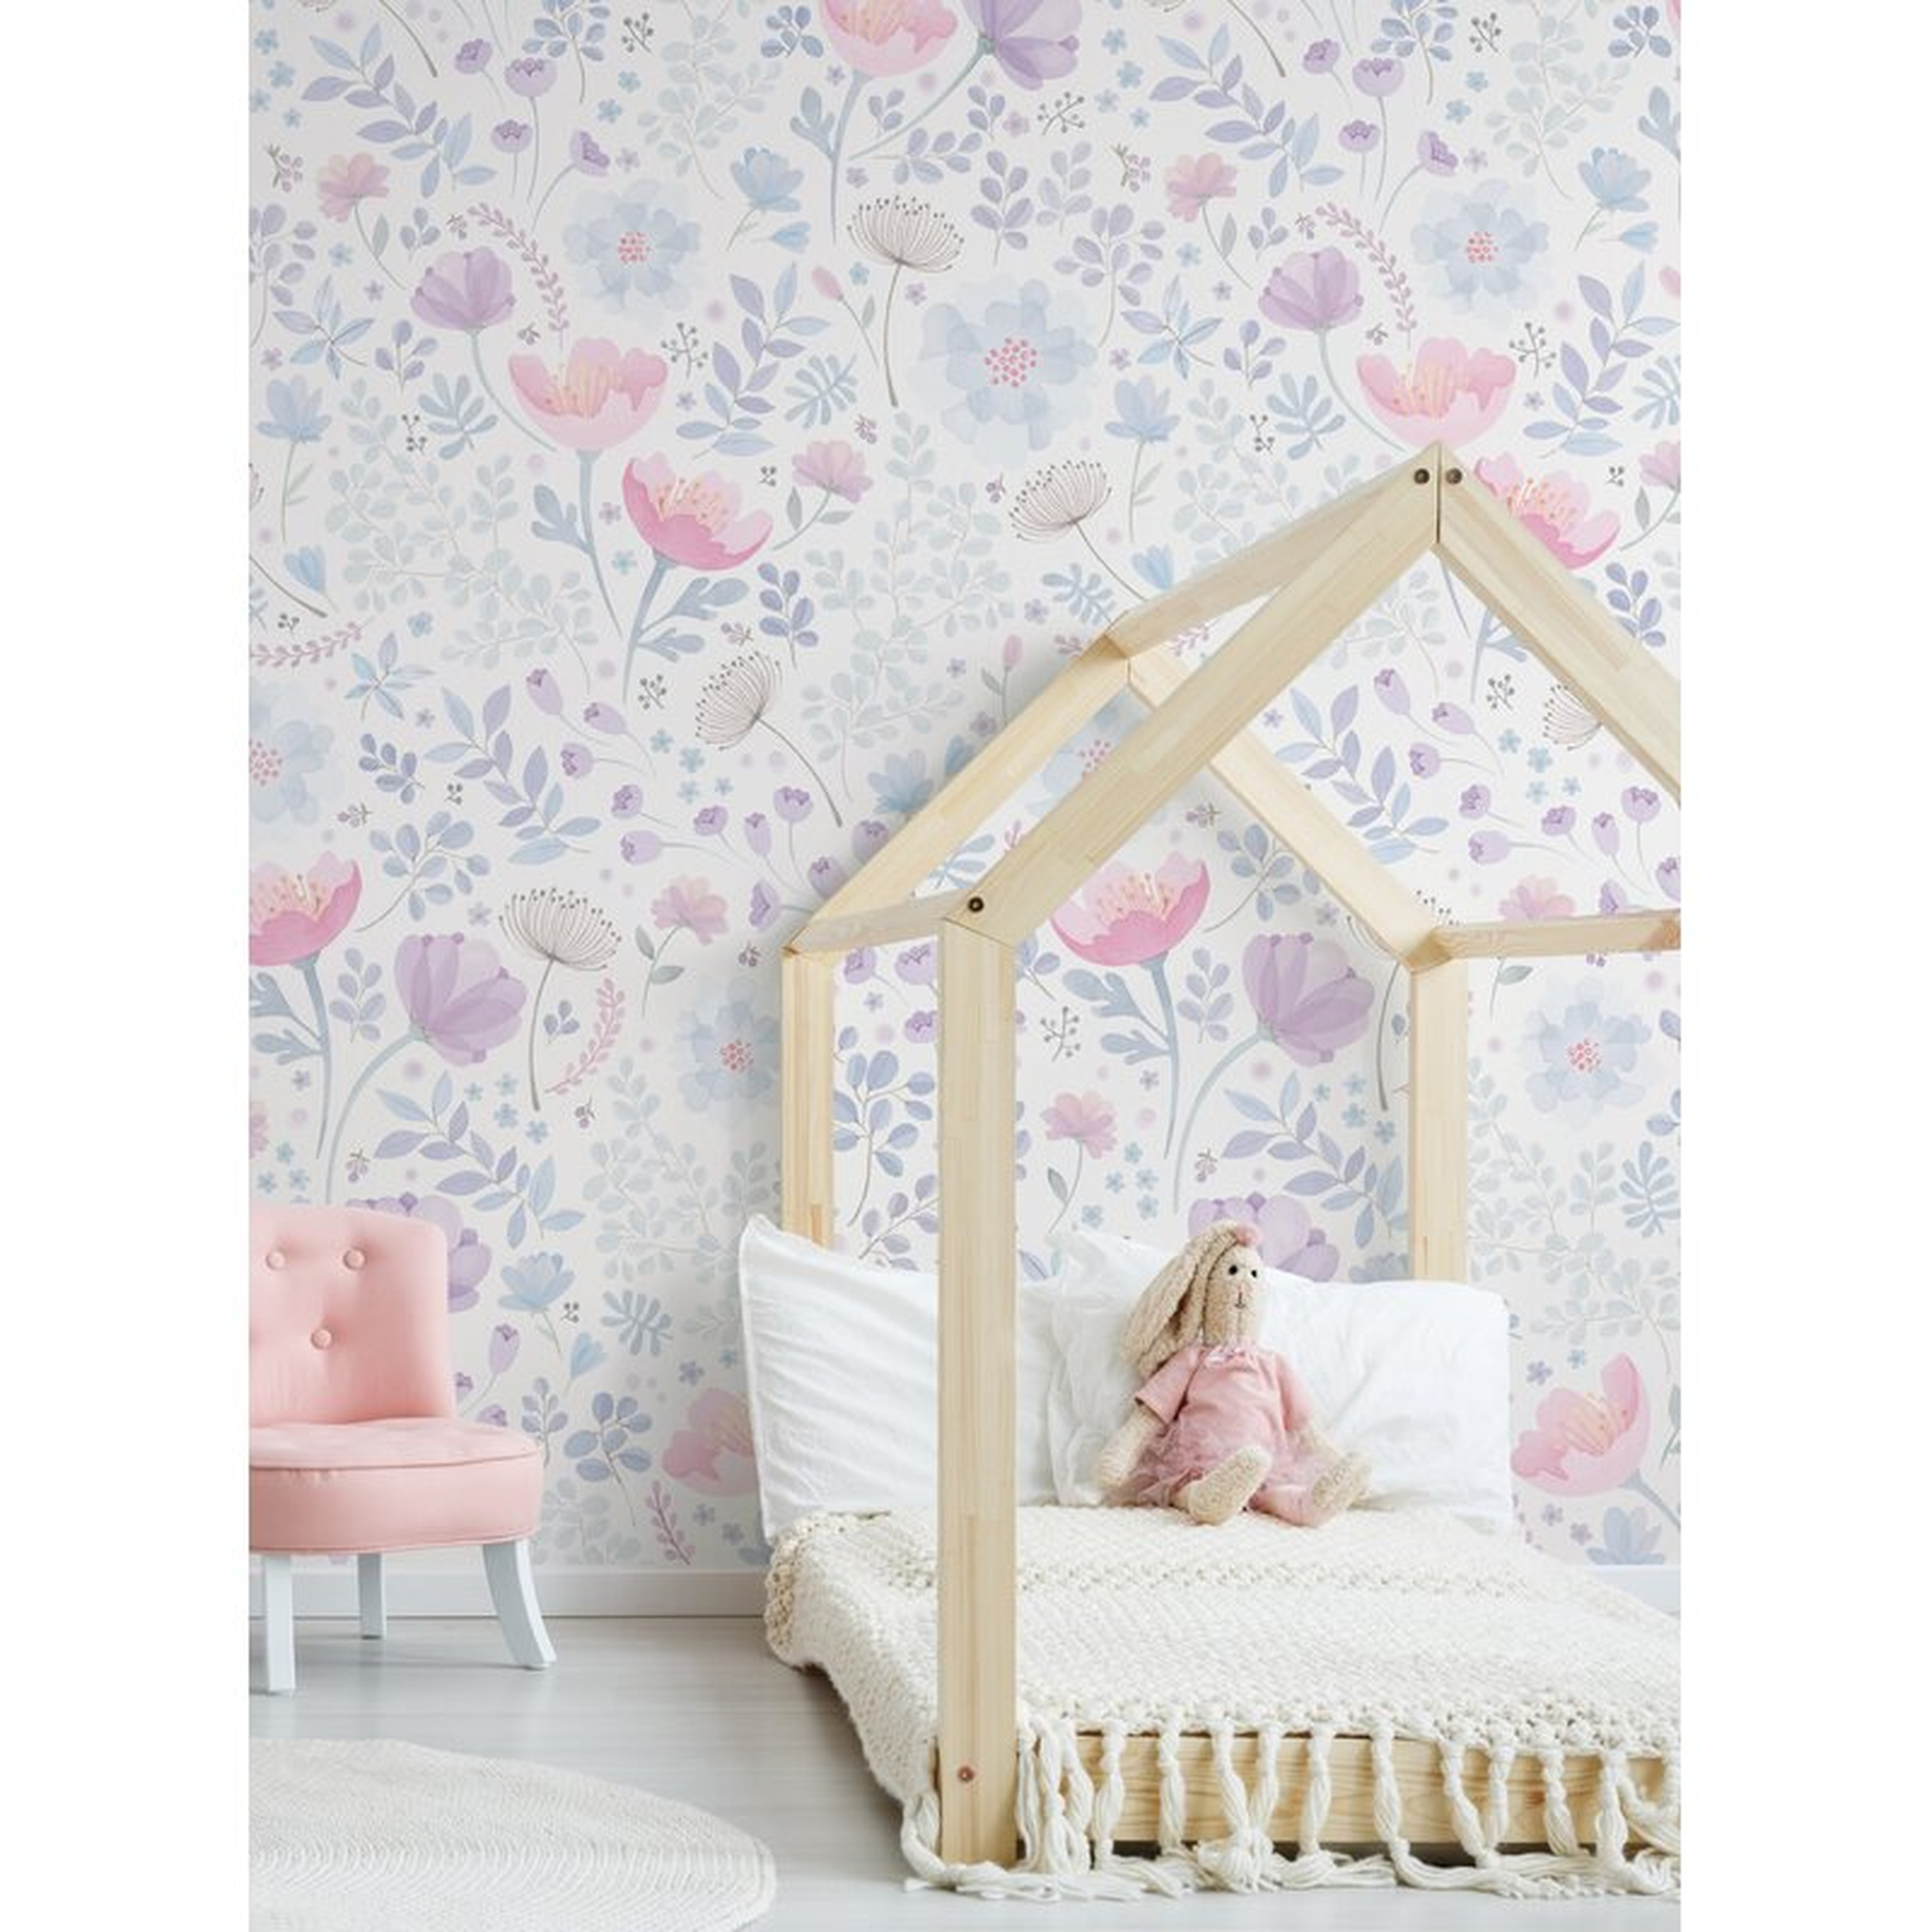 Lima Whimsy Floral Watercolor Peel And Stick Wallpaper Panel - Wayfair